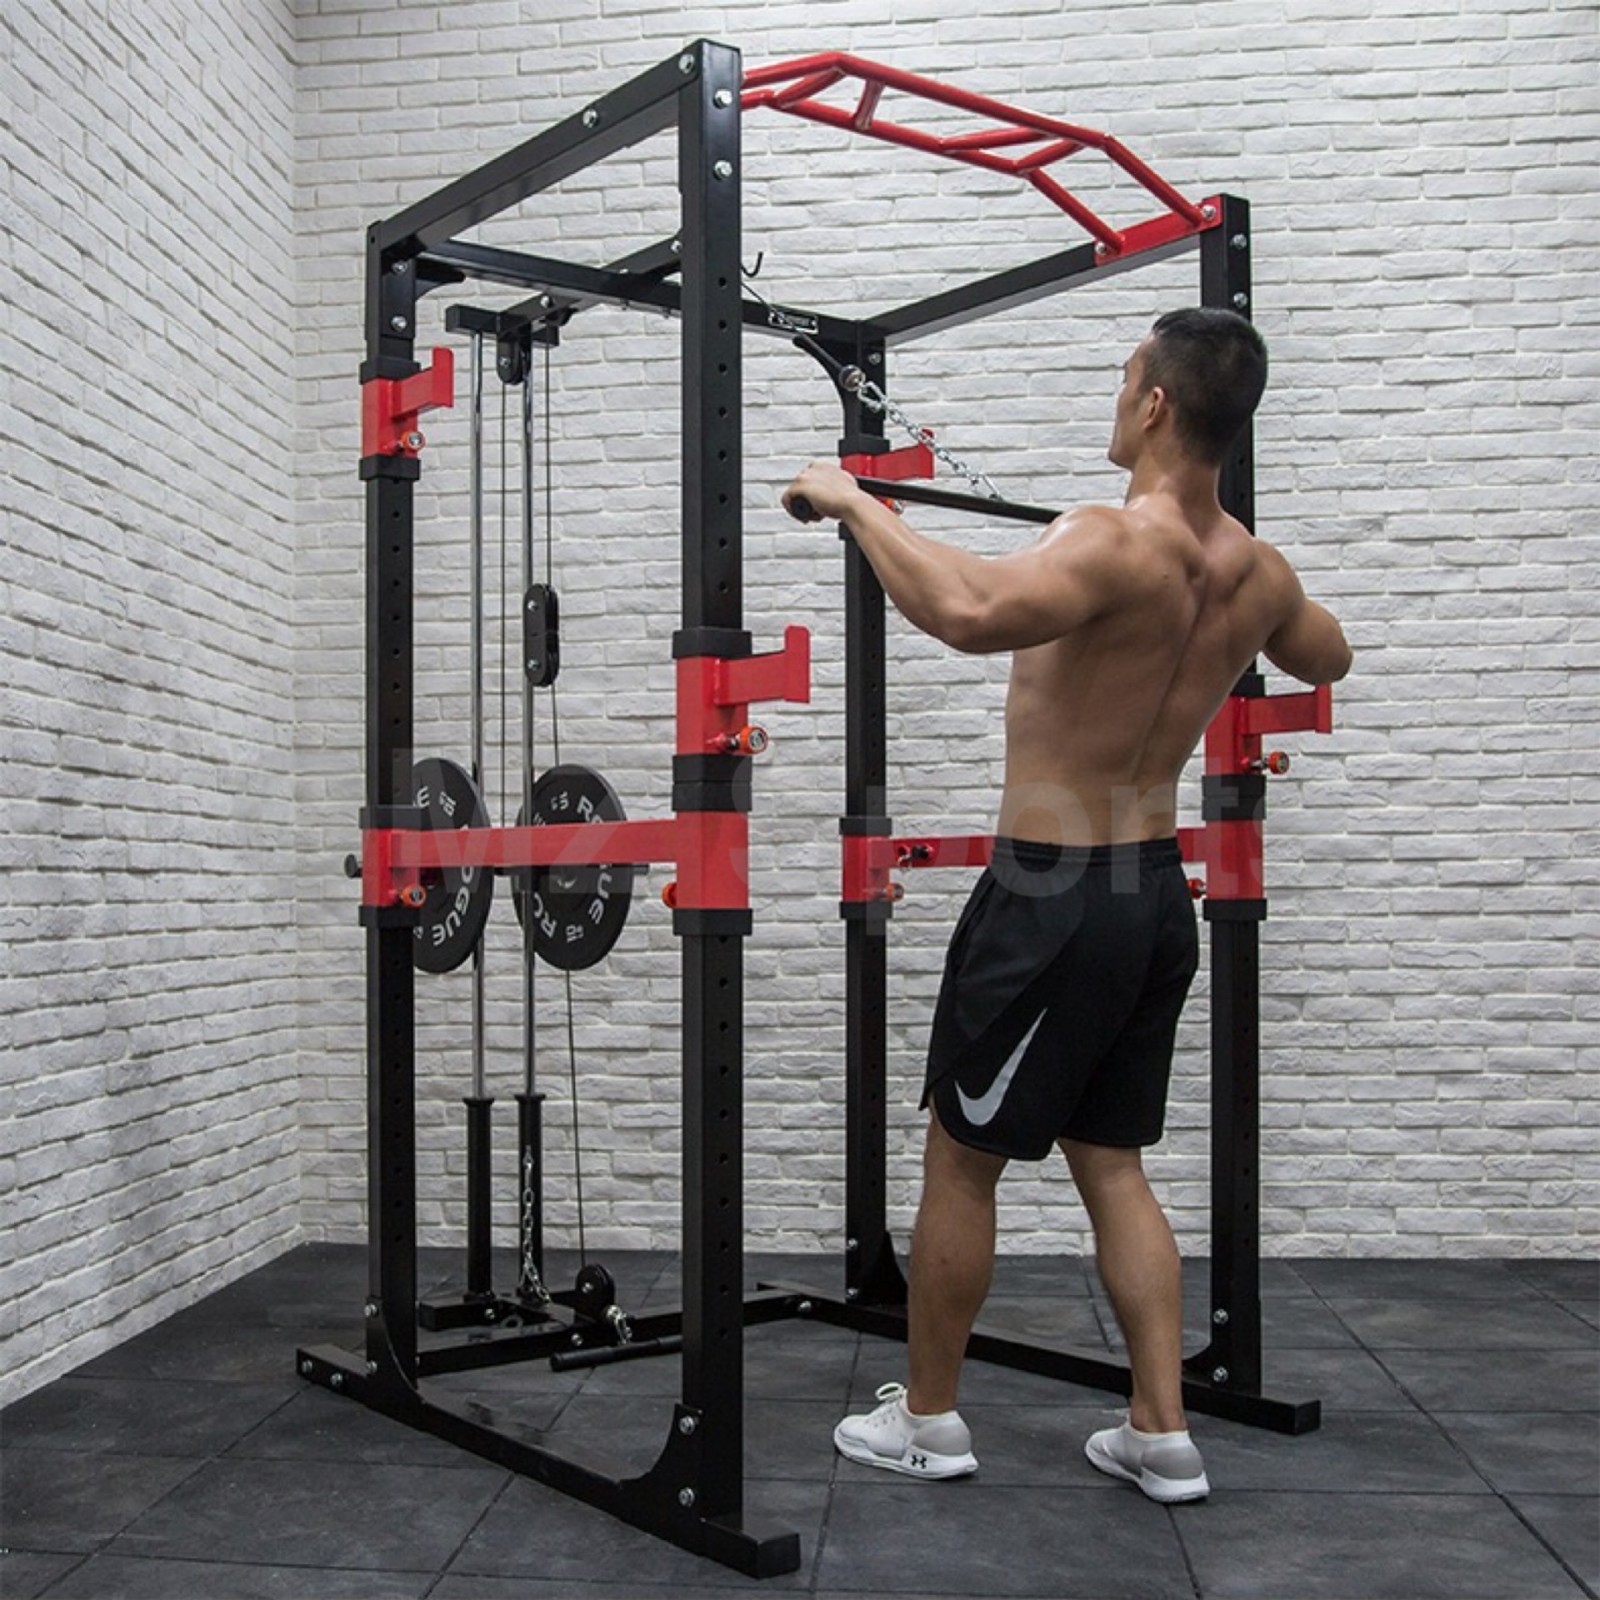 NEW Pro Multi Power Rack Cage Lat Pull Down Dip Bar Bench Press Squats ...